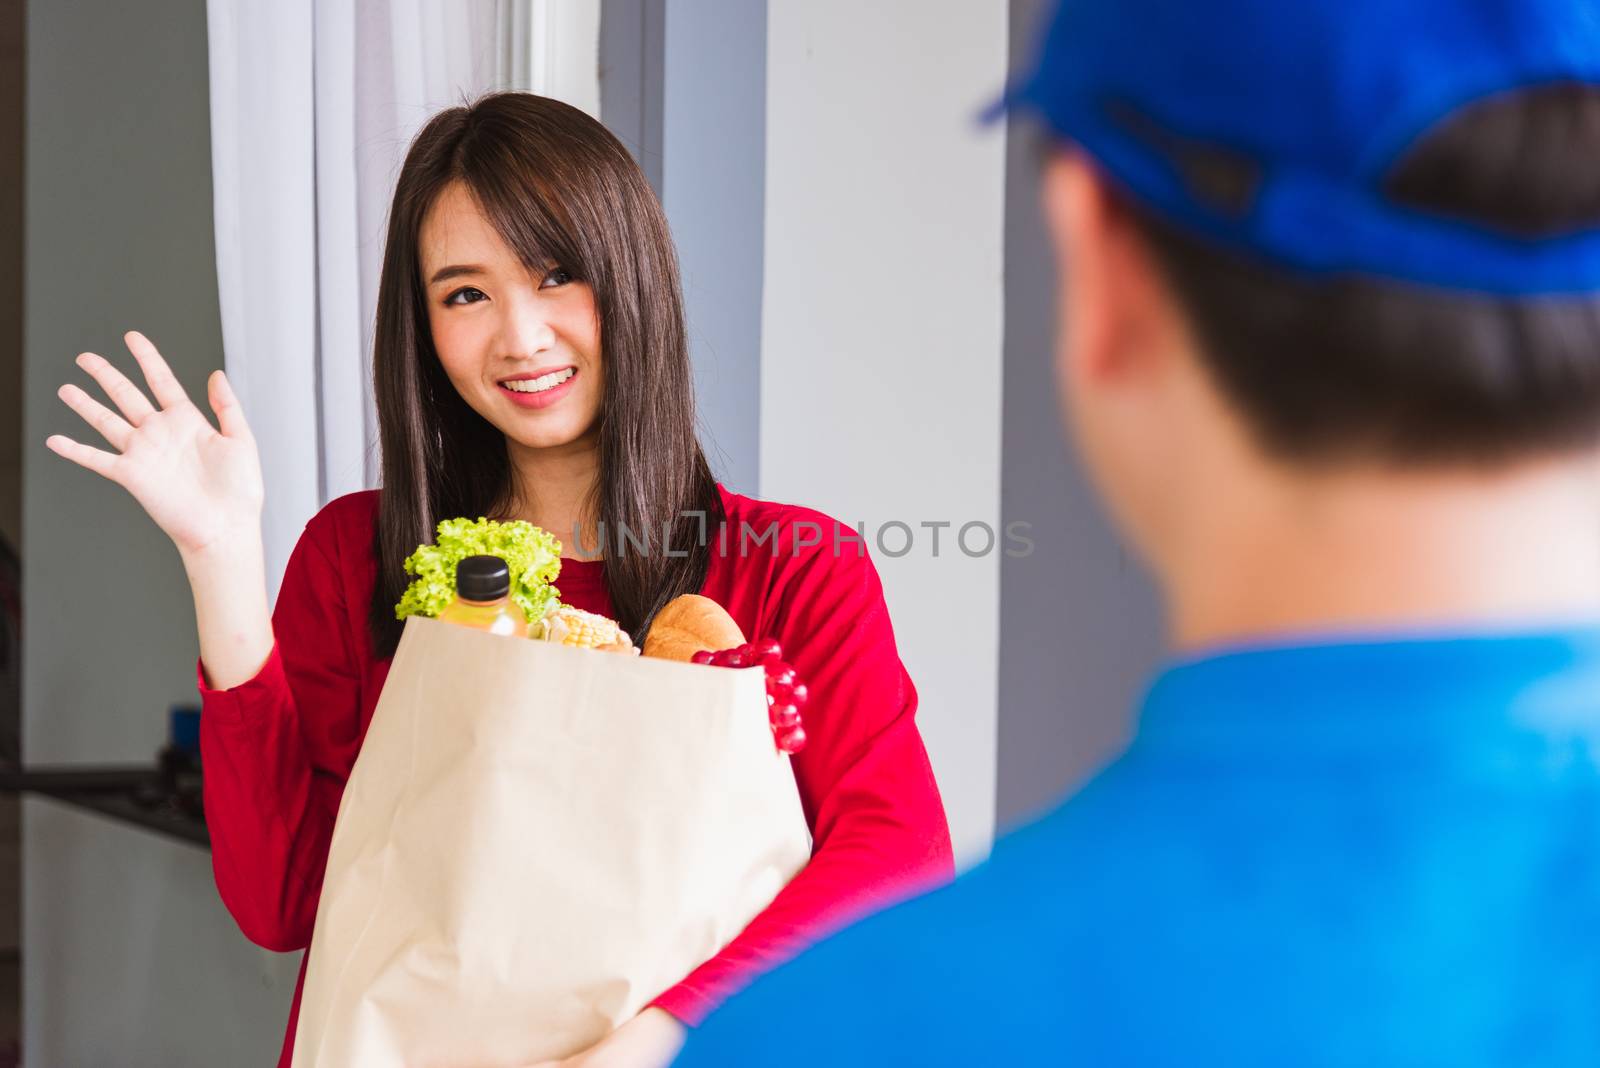 Delivery man making grocery service giving fresh vegetables in p by Sorapop